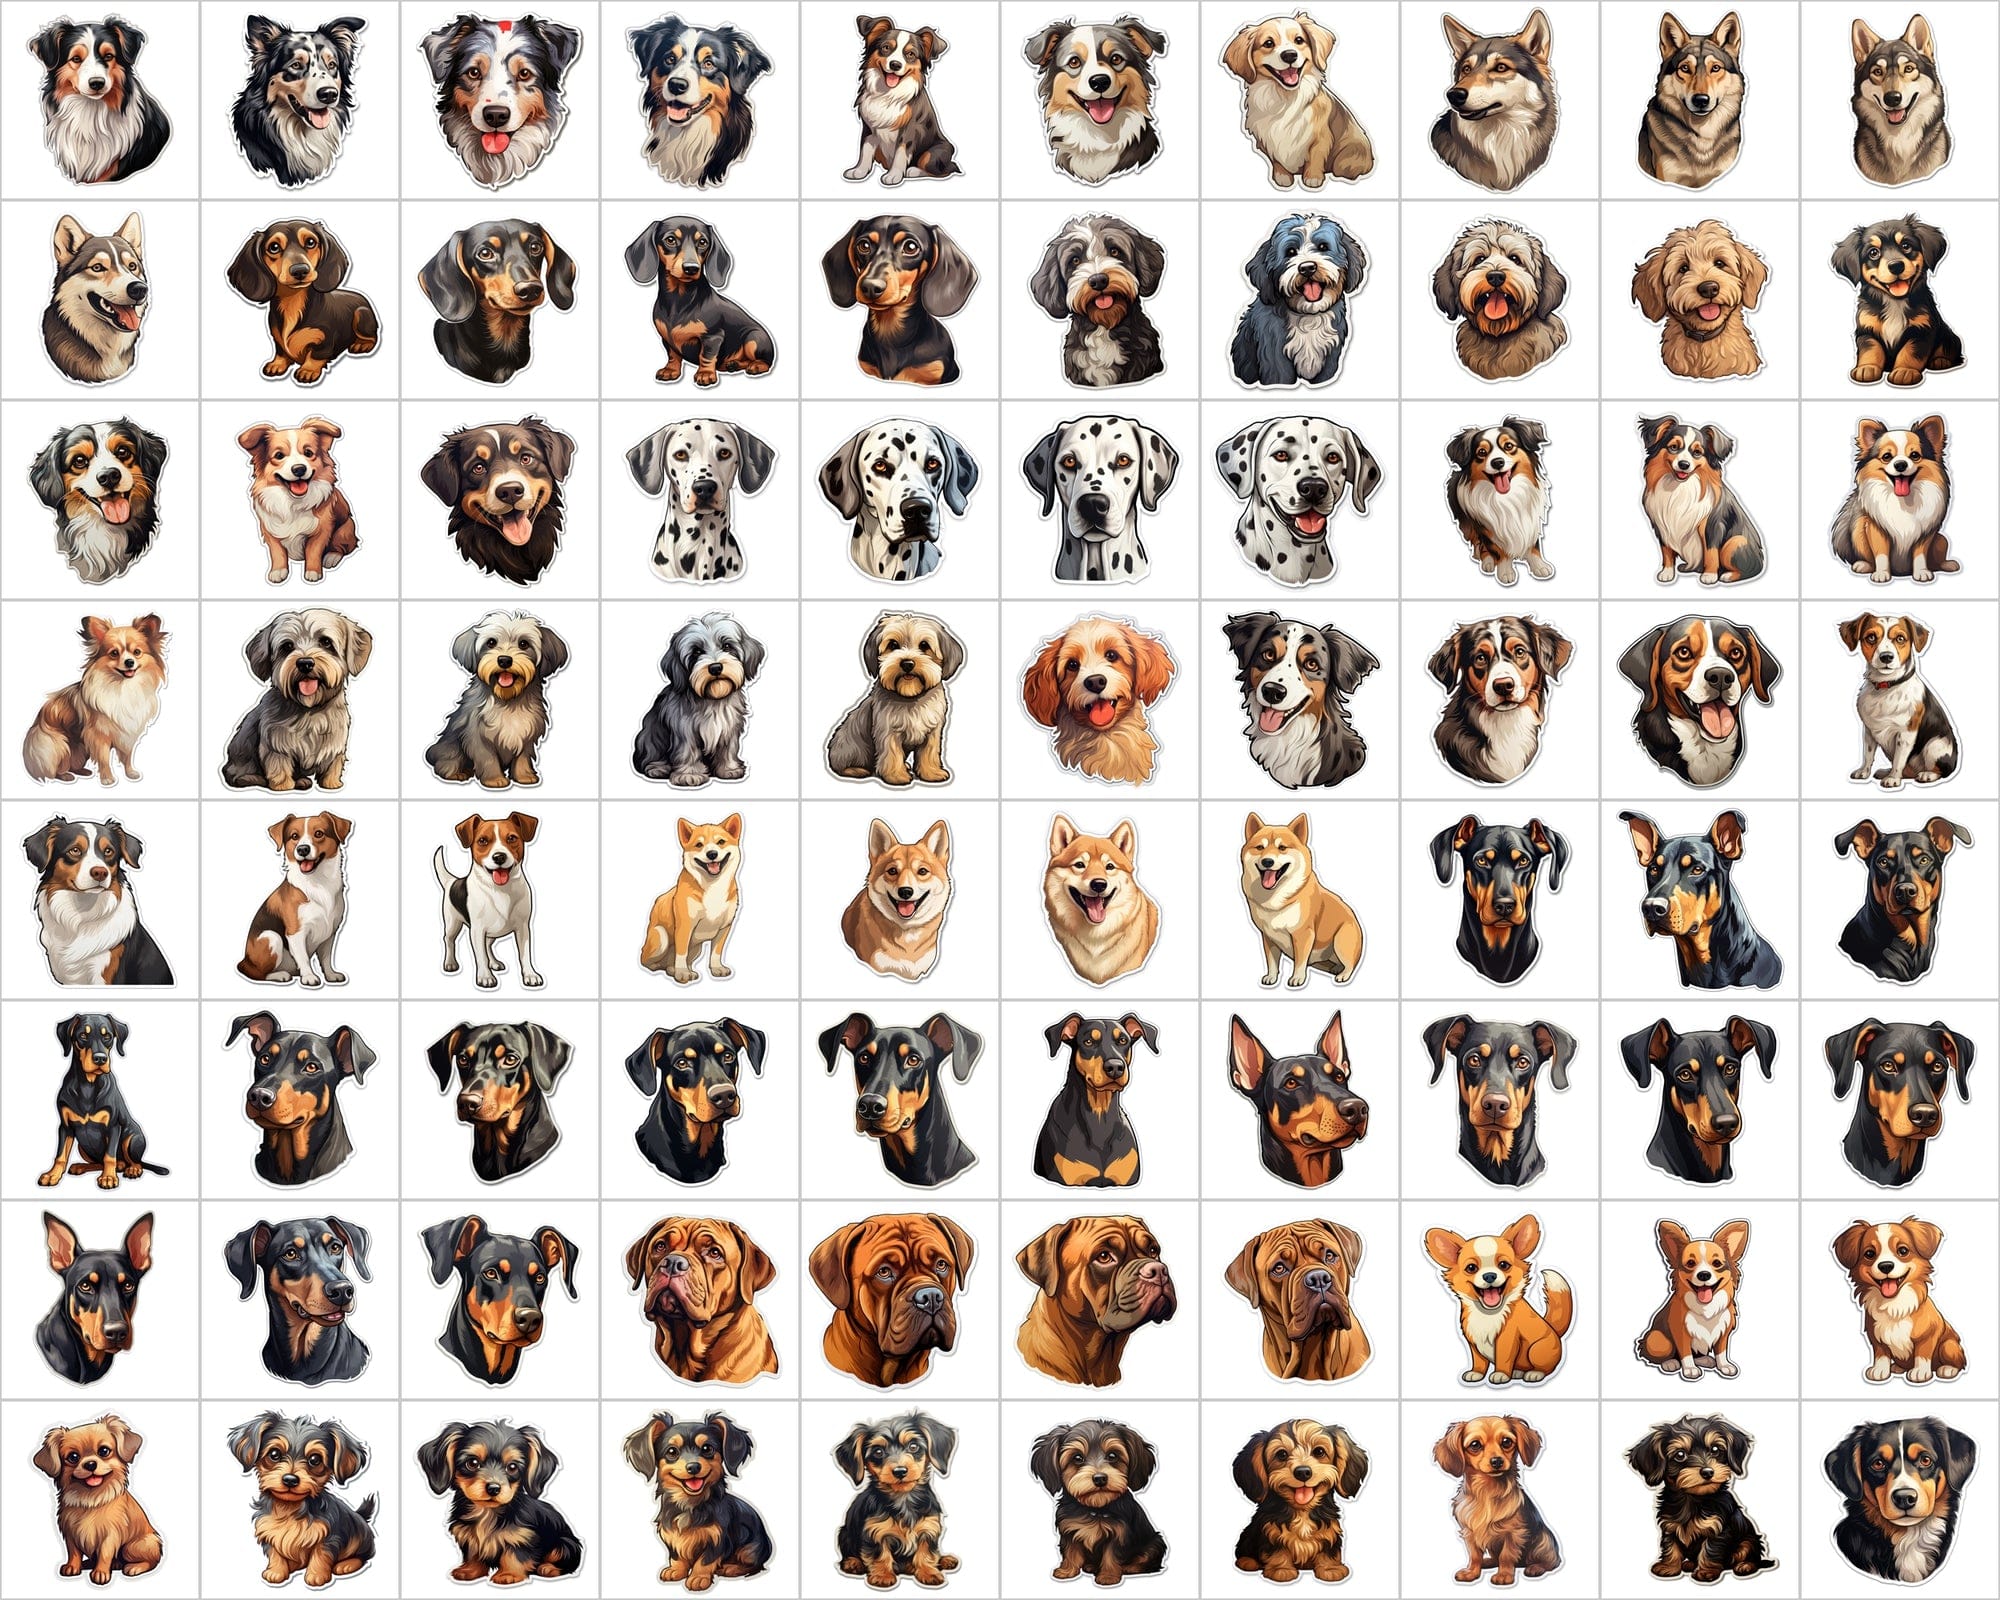 Ultimate Dog Breed Stickers Bundle - 2600 PNG Images with & without Backgrounds - Commercial Use Digital Download Sumobundle